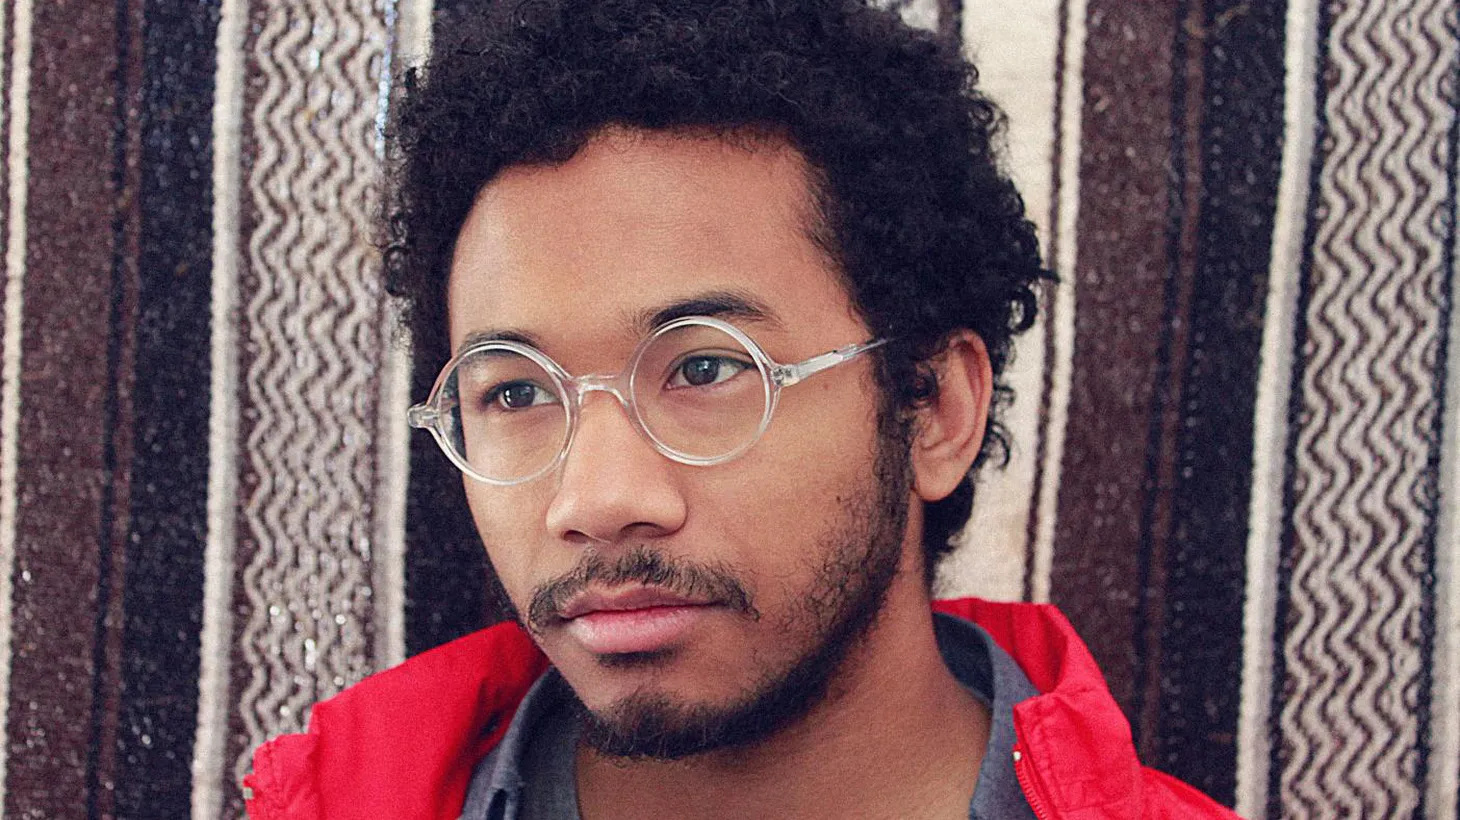 Chaz Bundick, best known as Toro Y Moi, creates a lush ambiance with space age flourishes. He's put out two fantastic releases in as many years and we experience it all when he's joined by a full band on Morning Becomes Eclectic at 11:15am.